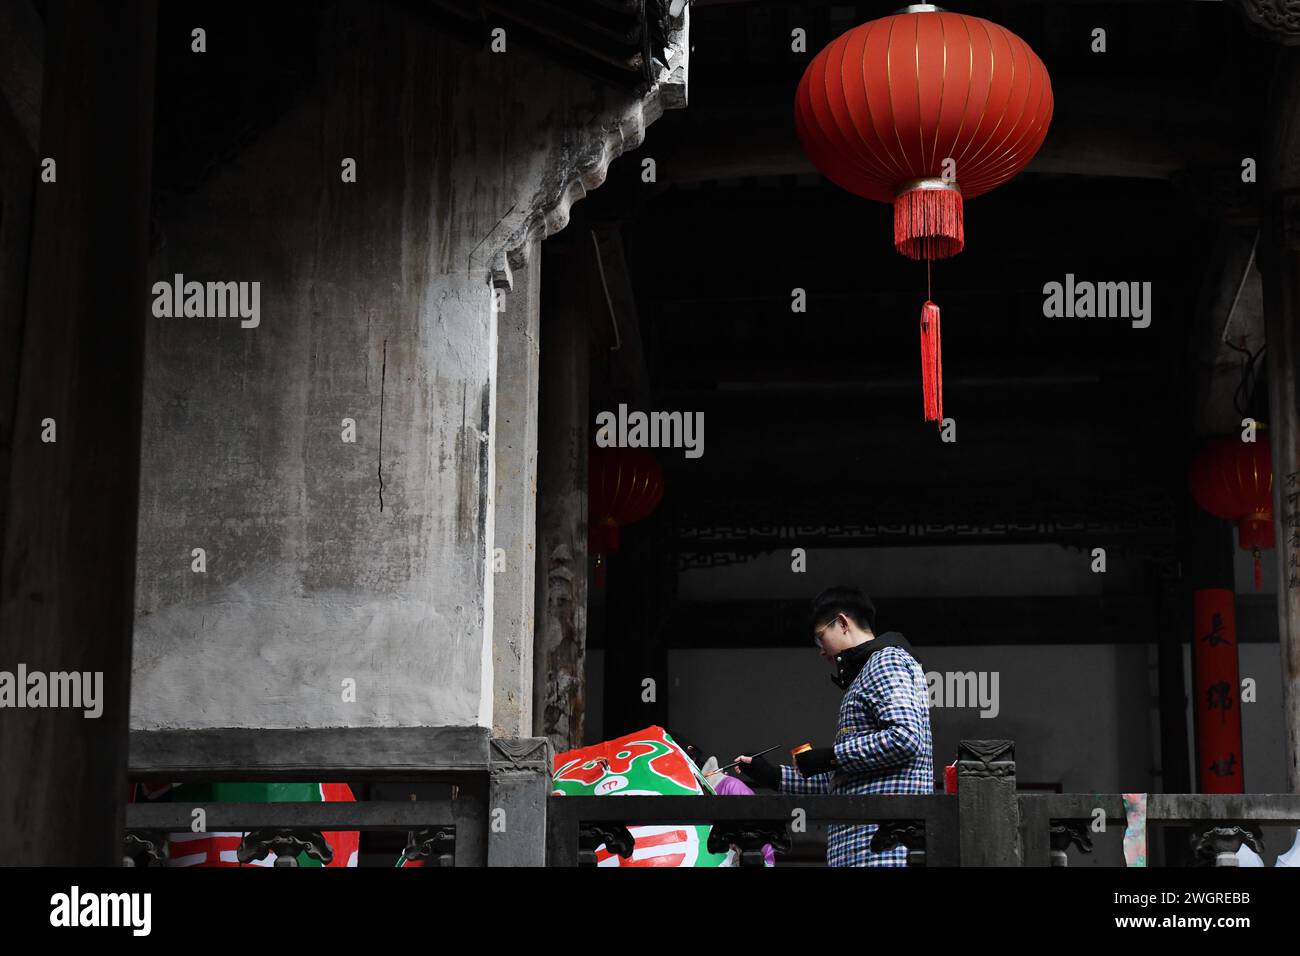 (240206) -- SHEXIAN, Feb. 6, 2024 (Xinhua) -- University student Wang Yuxin makes fish-shaped lanterns in Zhanqi Village of Shexian County, Huangshan City, east China's Anhui Province, Feb. 4, 2024. The parade with fish-shaped lanterns is an important folk cultural activity in Shexian County. Every year, in the first month of Chinese lunar calendar, it attracts tourists from all over the country.   Born in 1996, Wang Yufang is an inheritor of fish-shaped lantern making skills, an intangible cultural heritage. Wang started to learn the skills from local villagers when he was 12 years old.     W Stock Photo